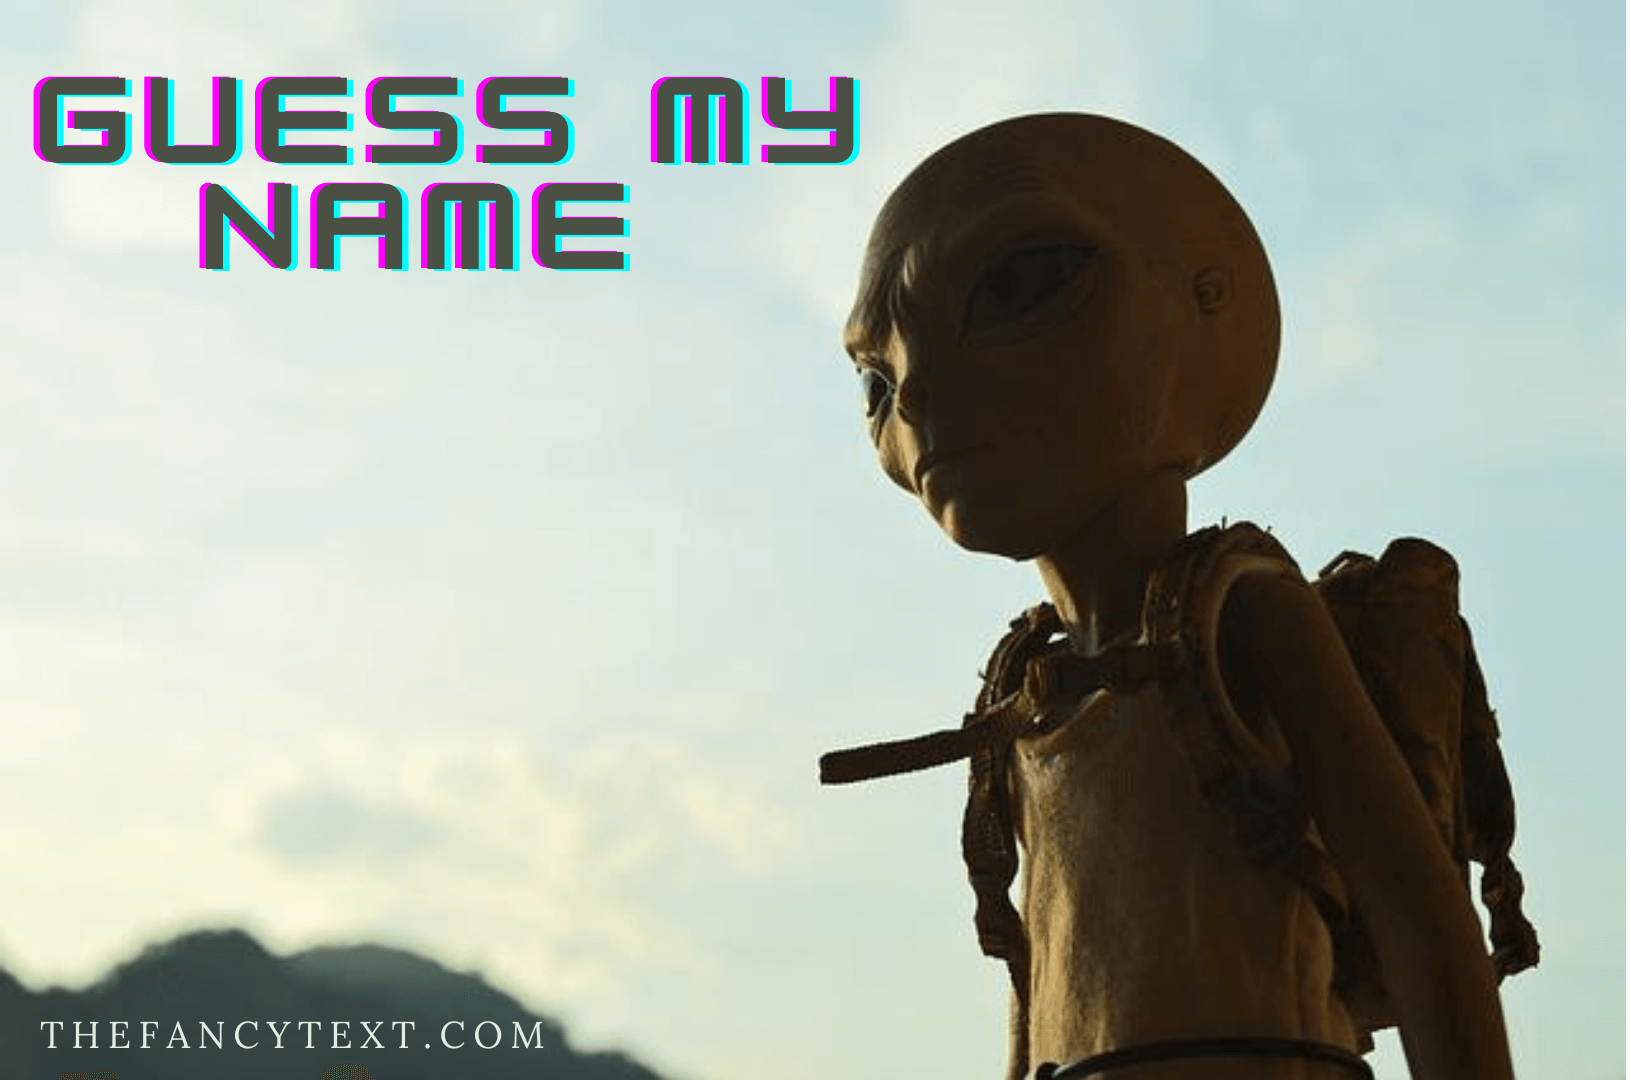 Get in touch with your inner alien using our Alien name generator. Give it  a go